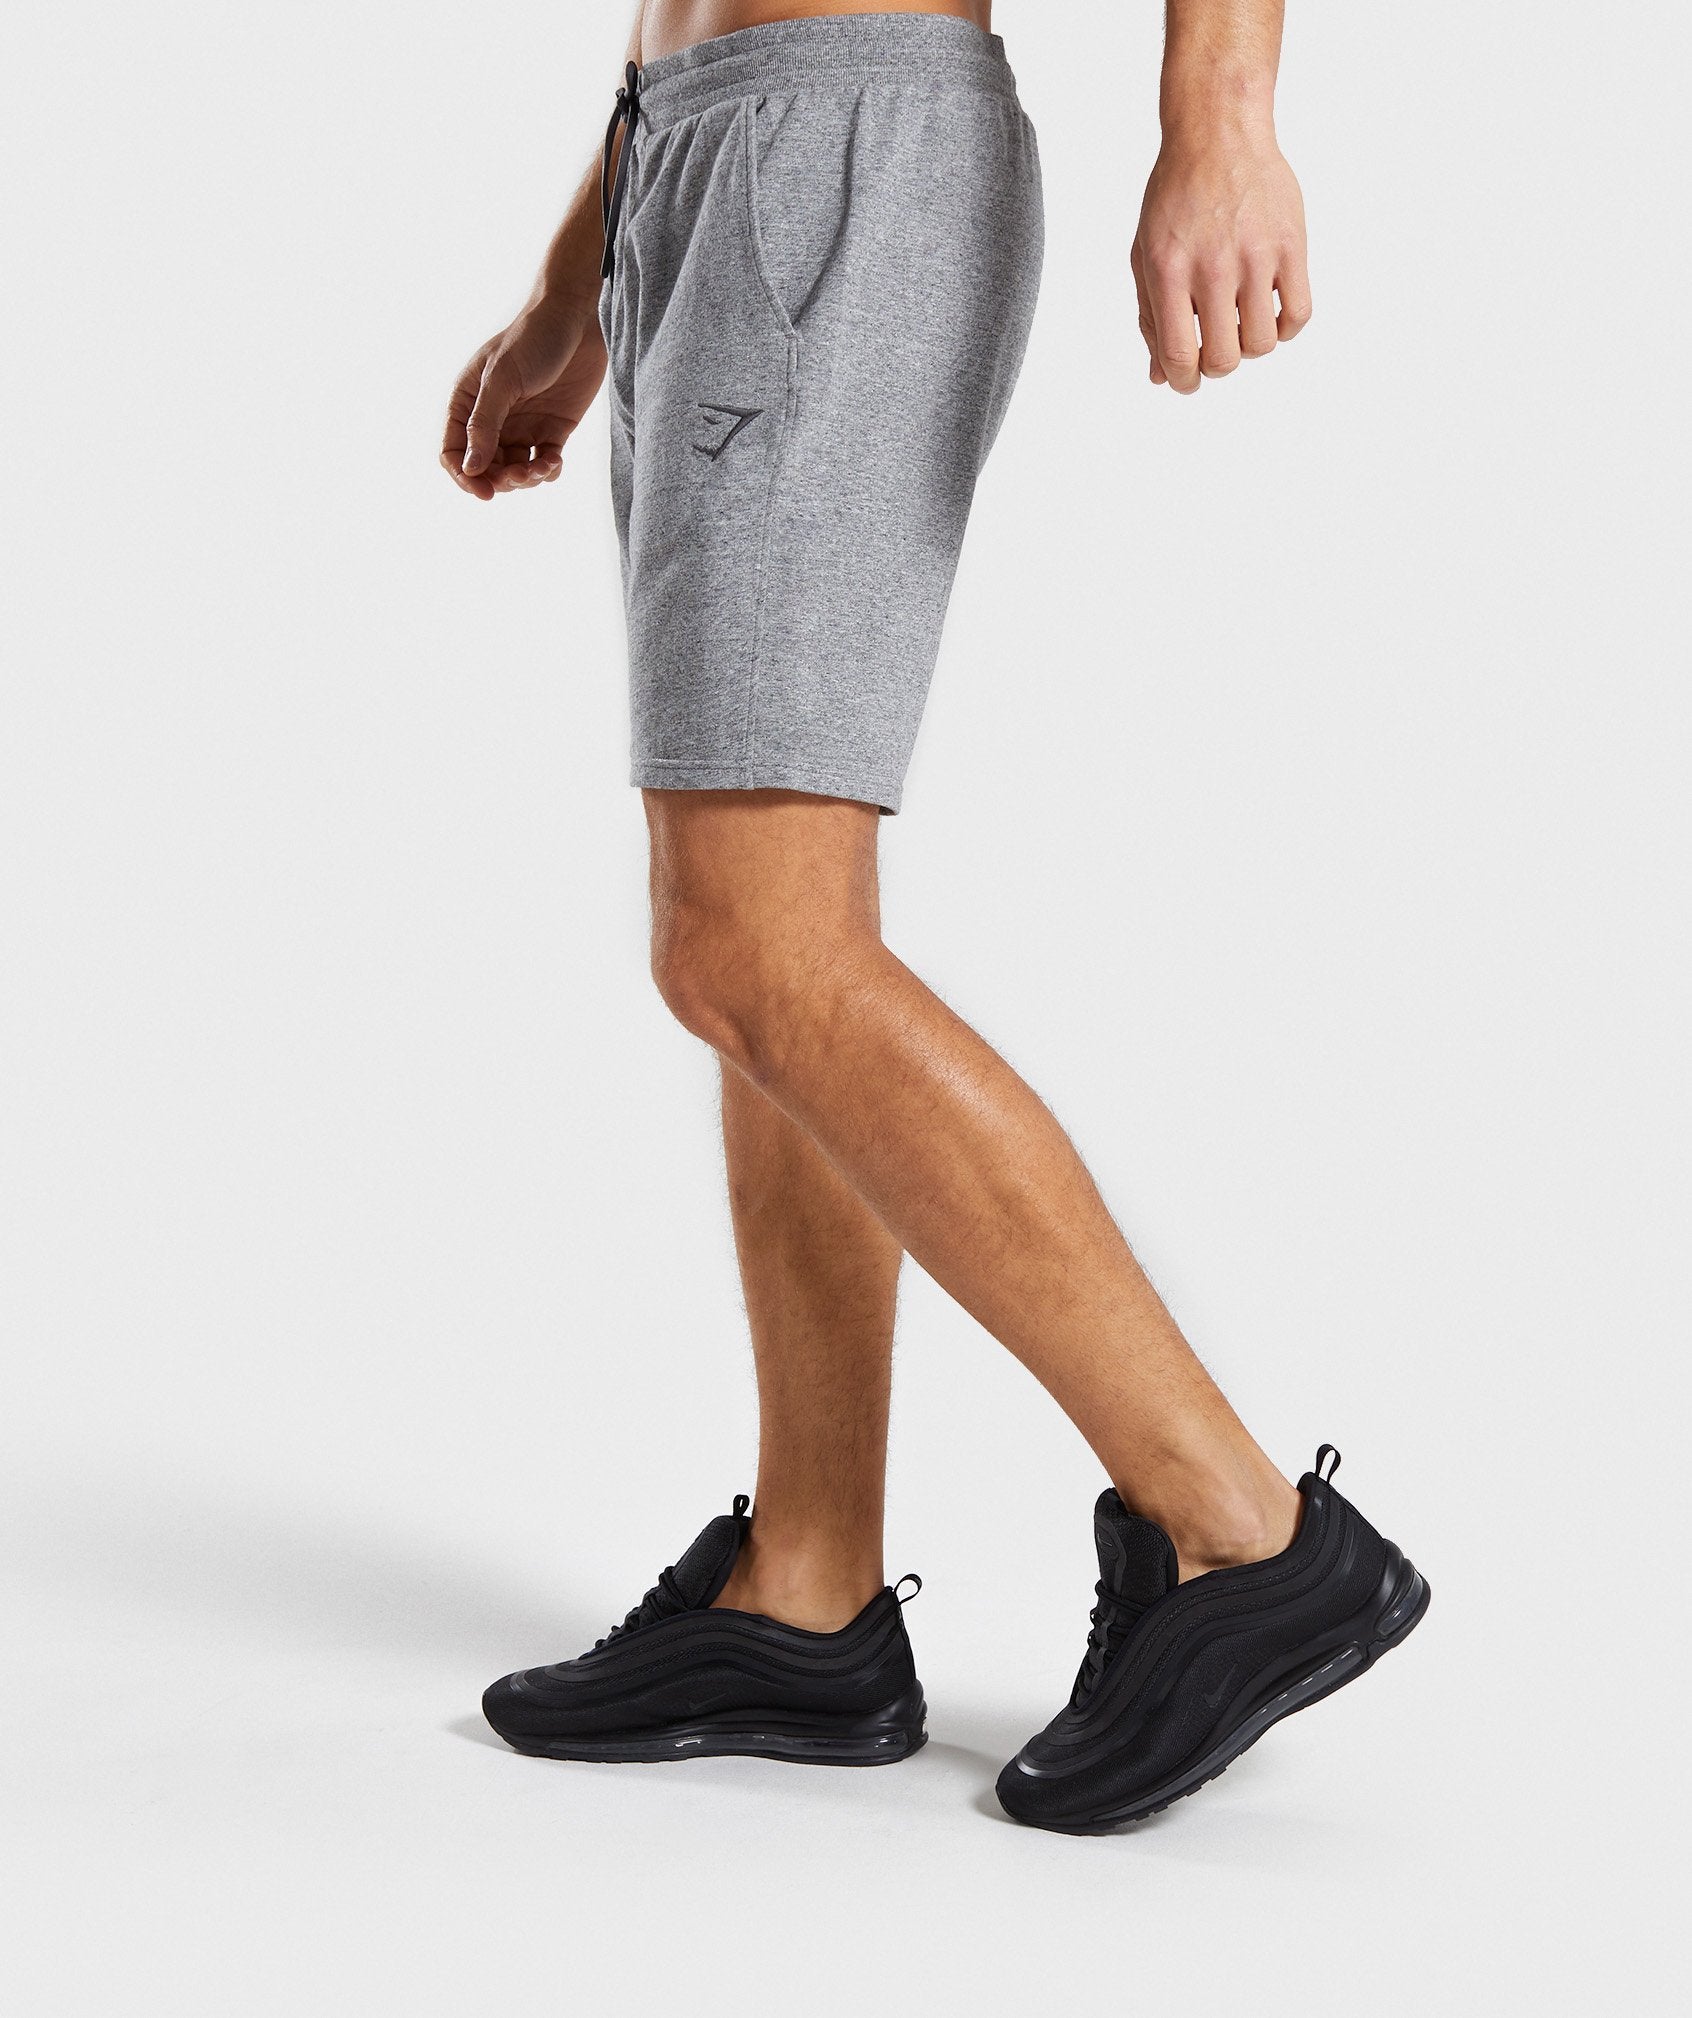 Lounge Shorts in Grey Marl - view 3